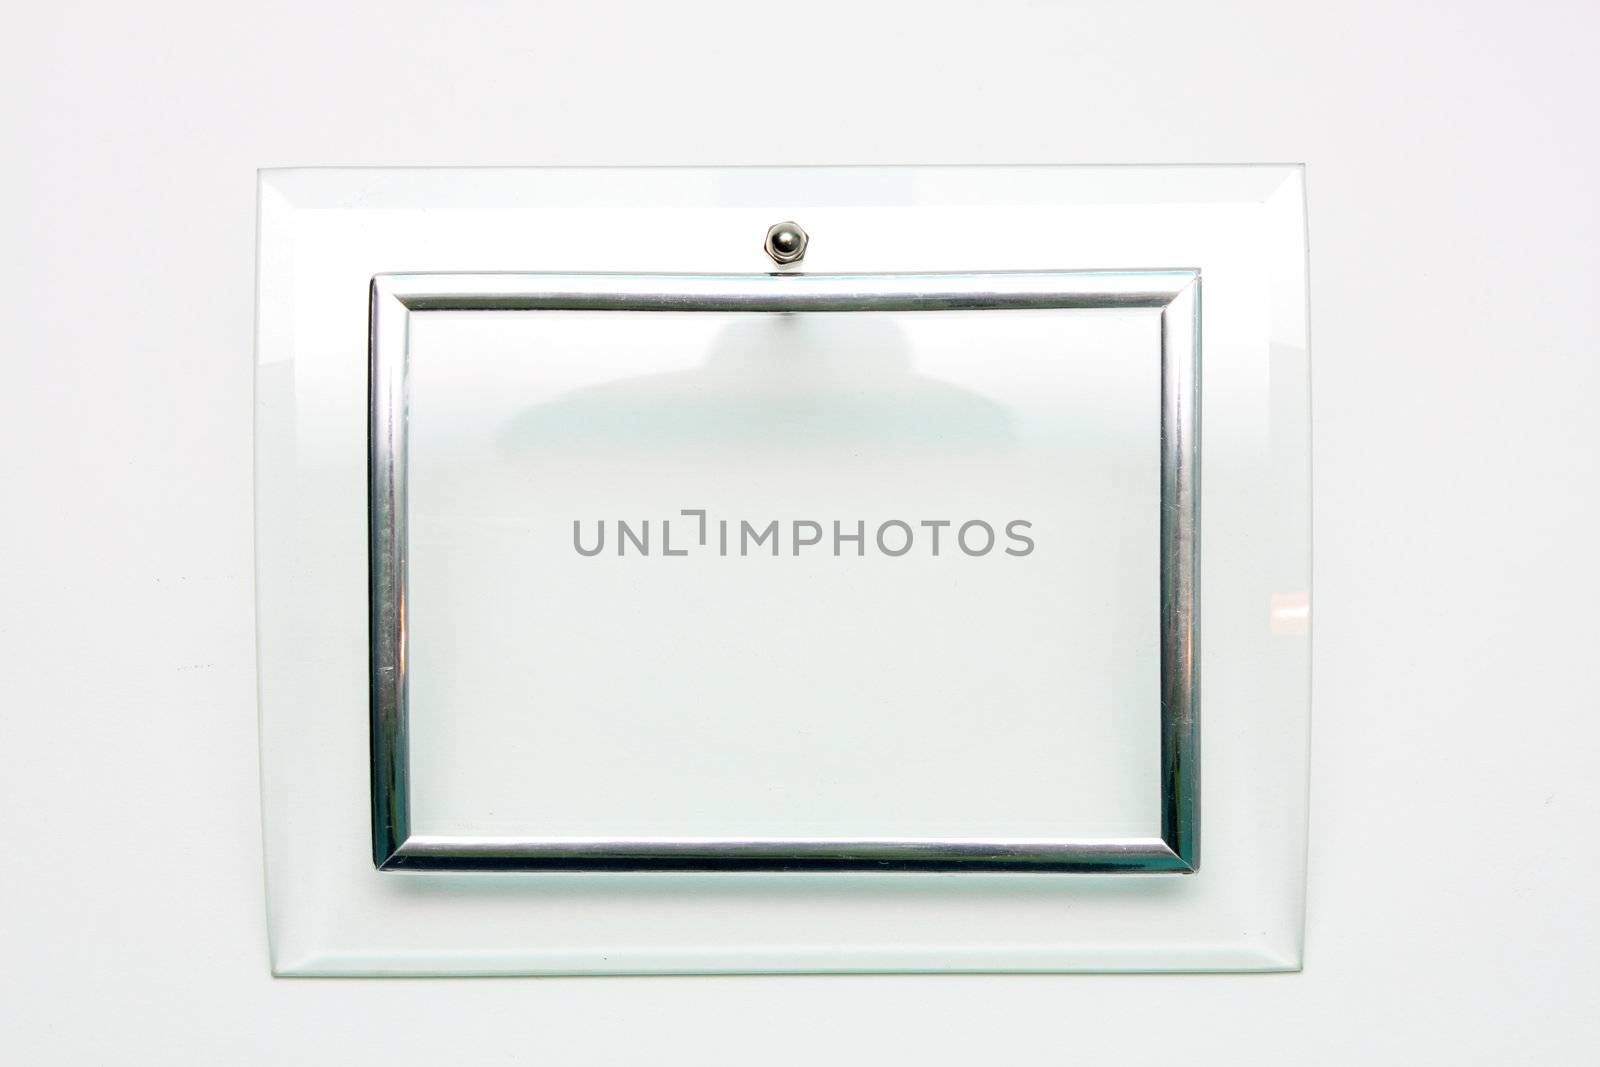 An empty picture frame, metal and glass on a white background